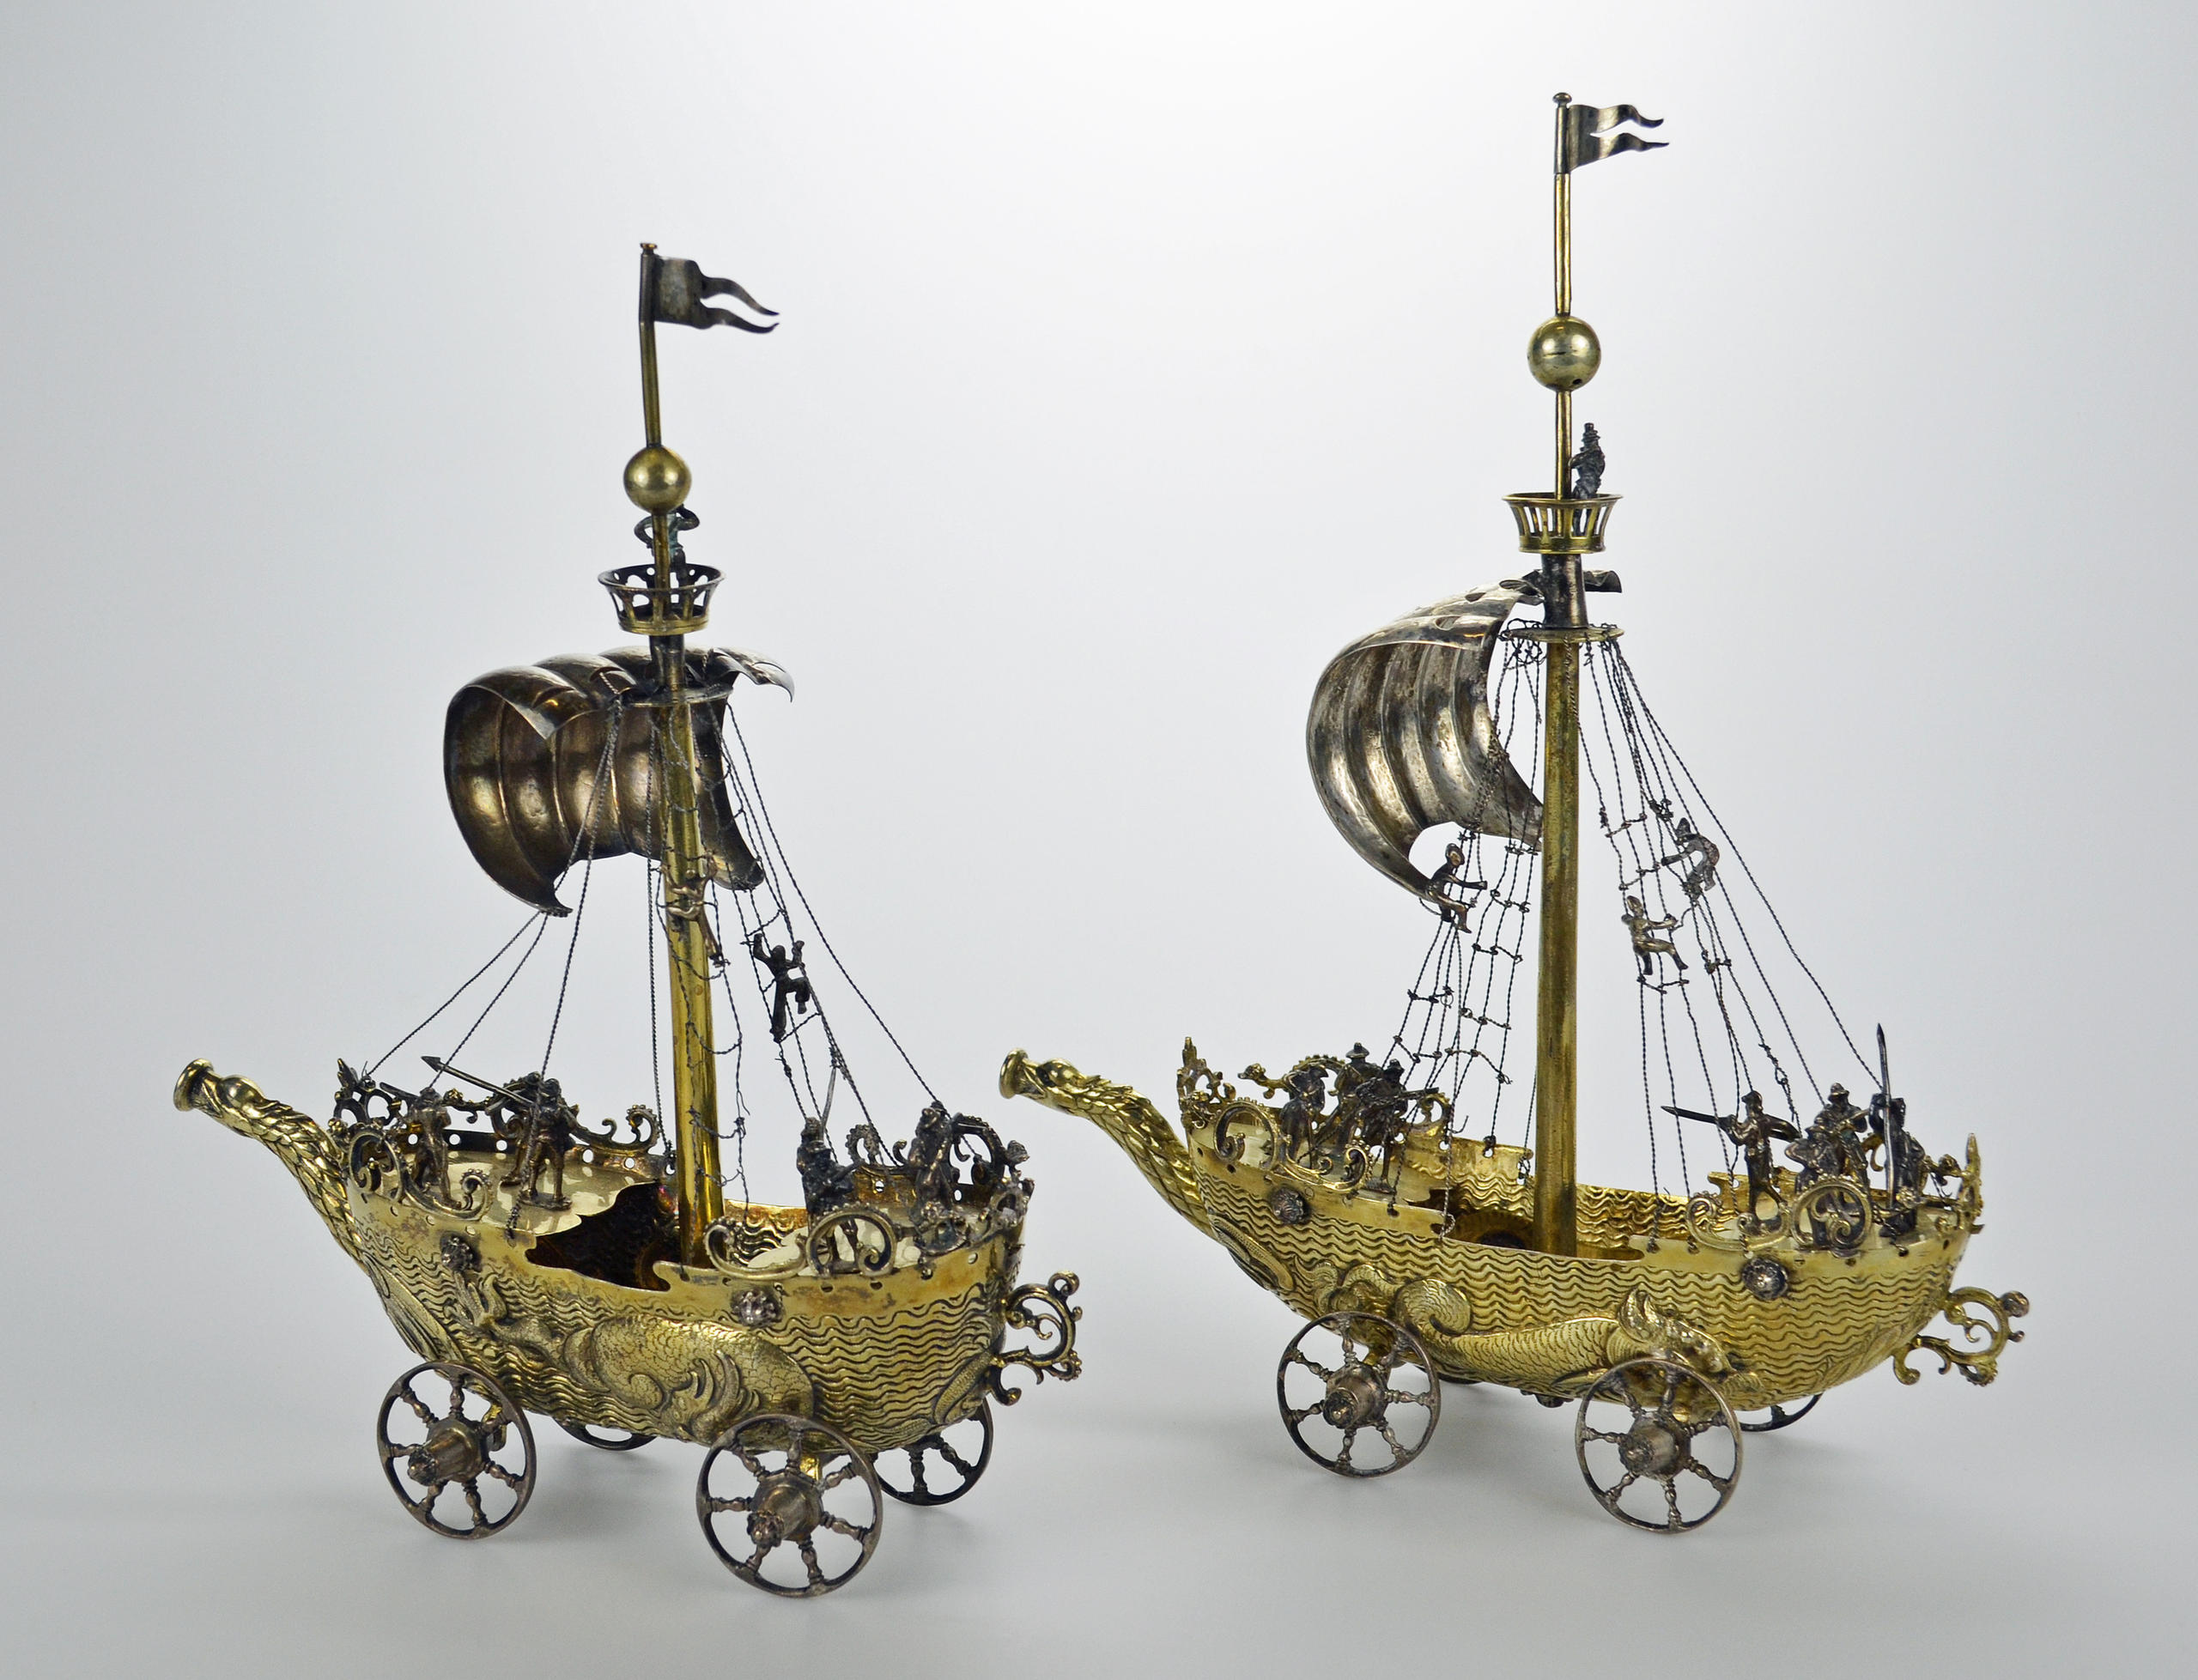 The silver-and-gold plated ornamental ships were made in 1630 by the German craftsman Georg Müller from Nürnberg